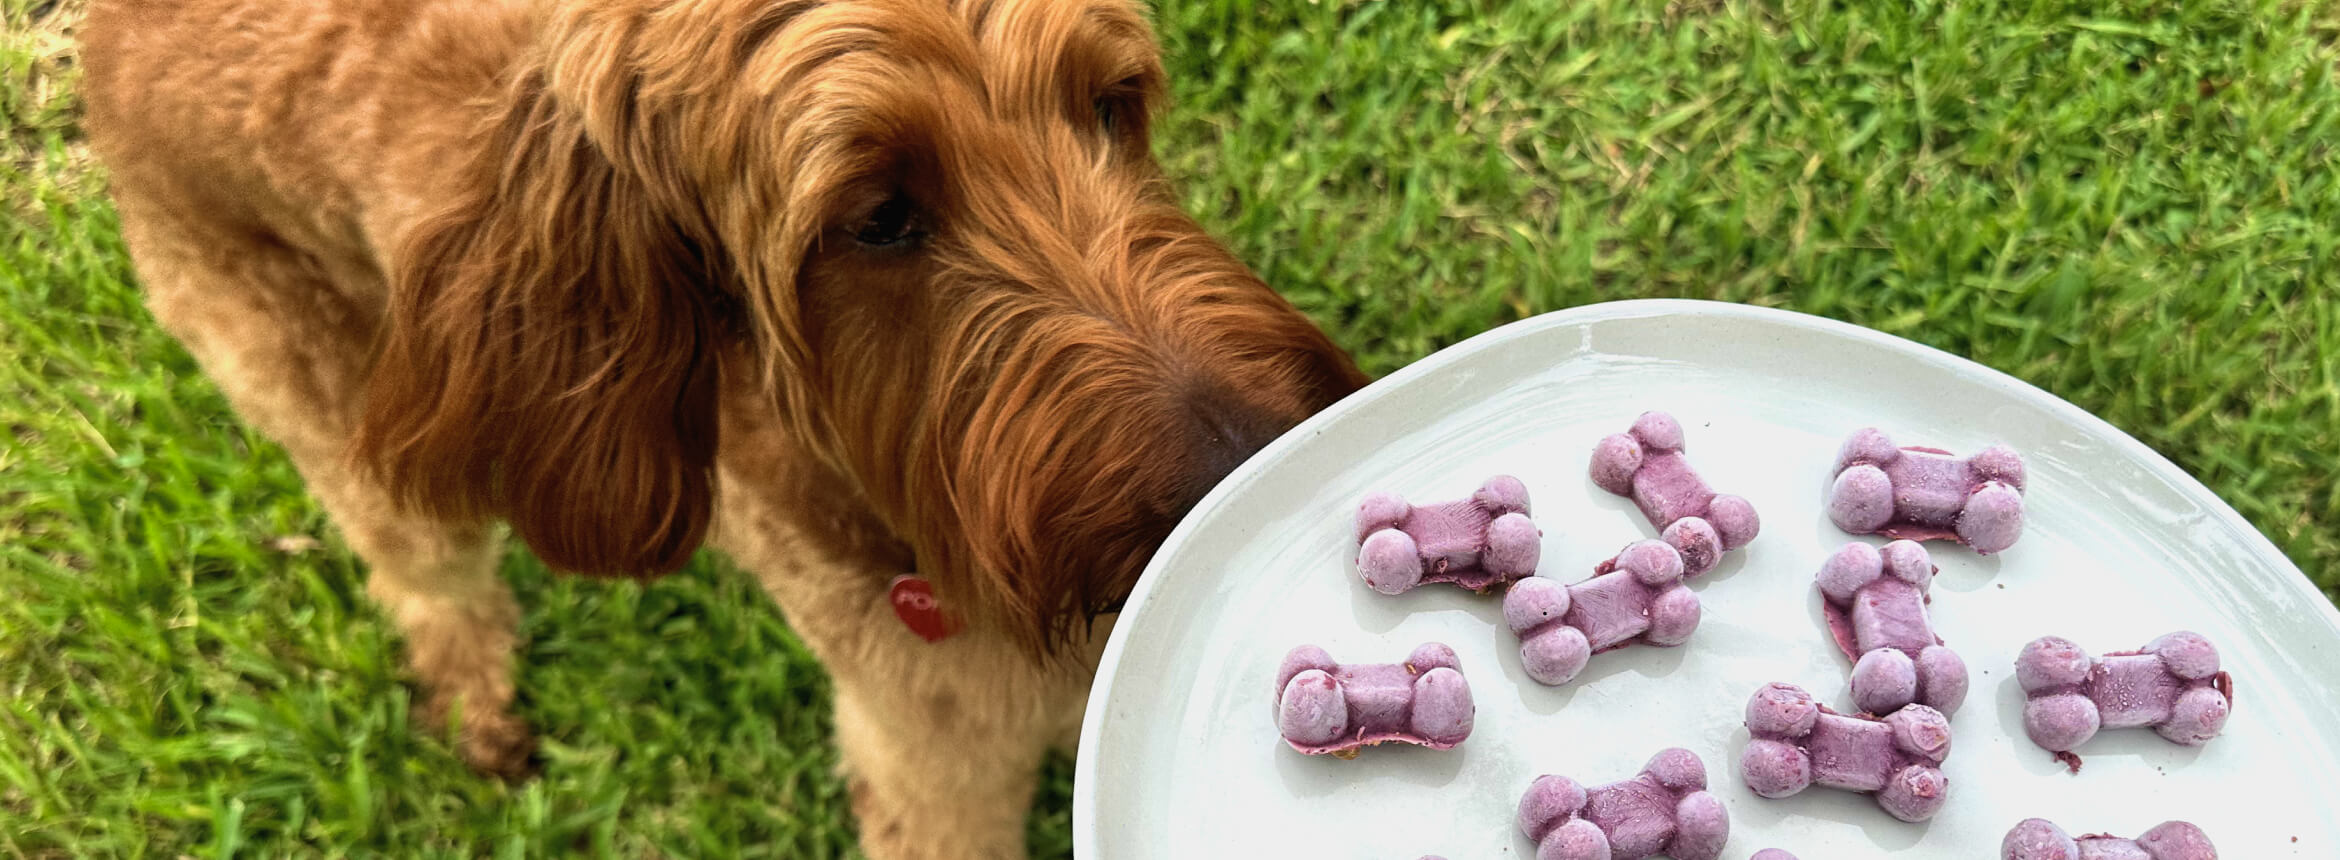 Frozen Dog Treats with Blueberries, Bananas, and BLUE Health Bars